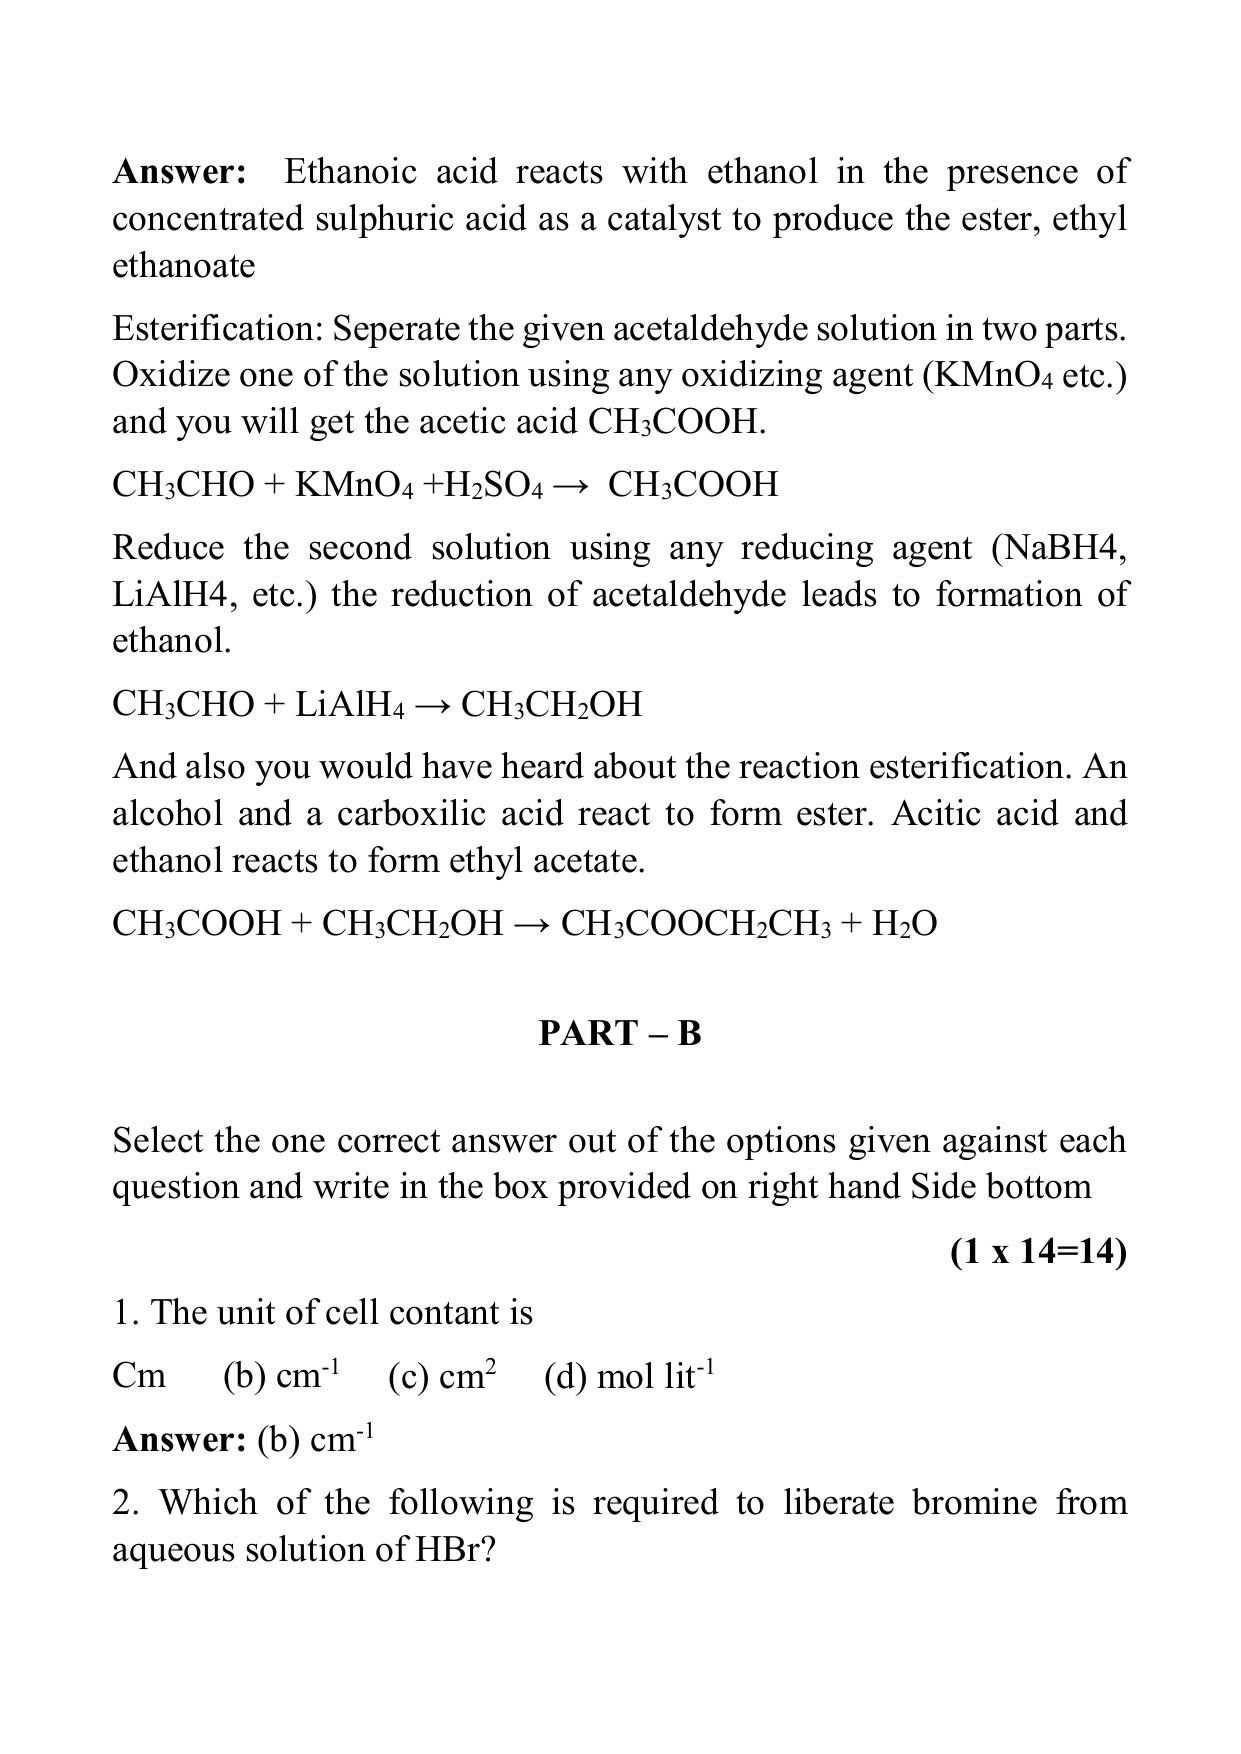 West Bengal Board Class 12 Chemistry 2018 Question Paper - Page 14